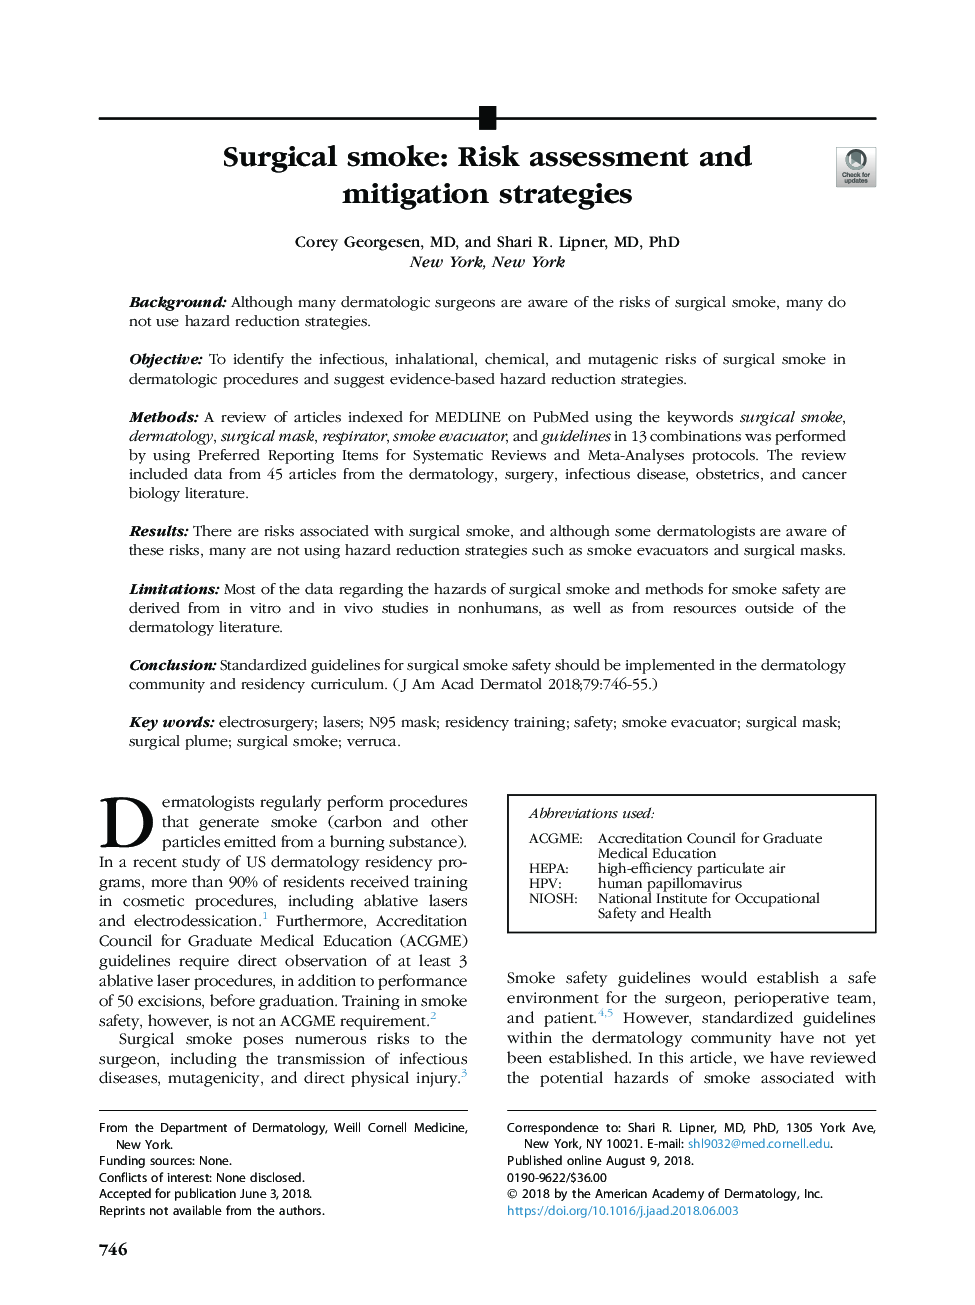 Surgical smoke: Risk assessment and mitigation strategies